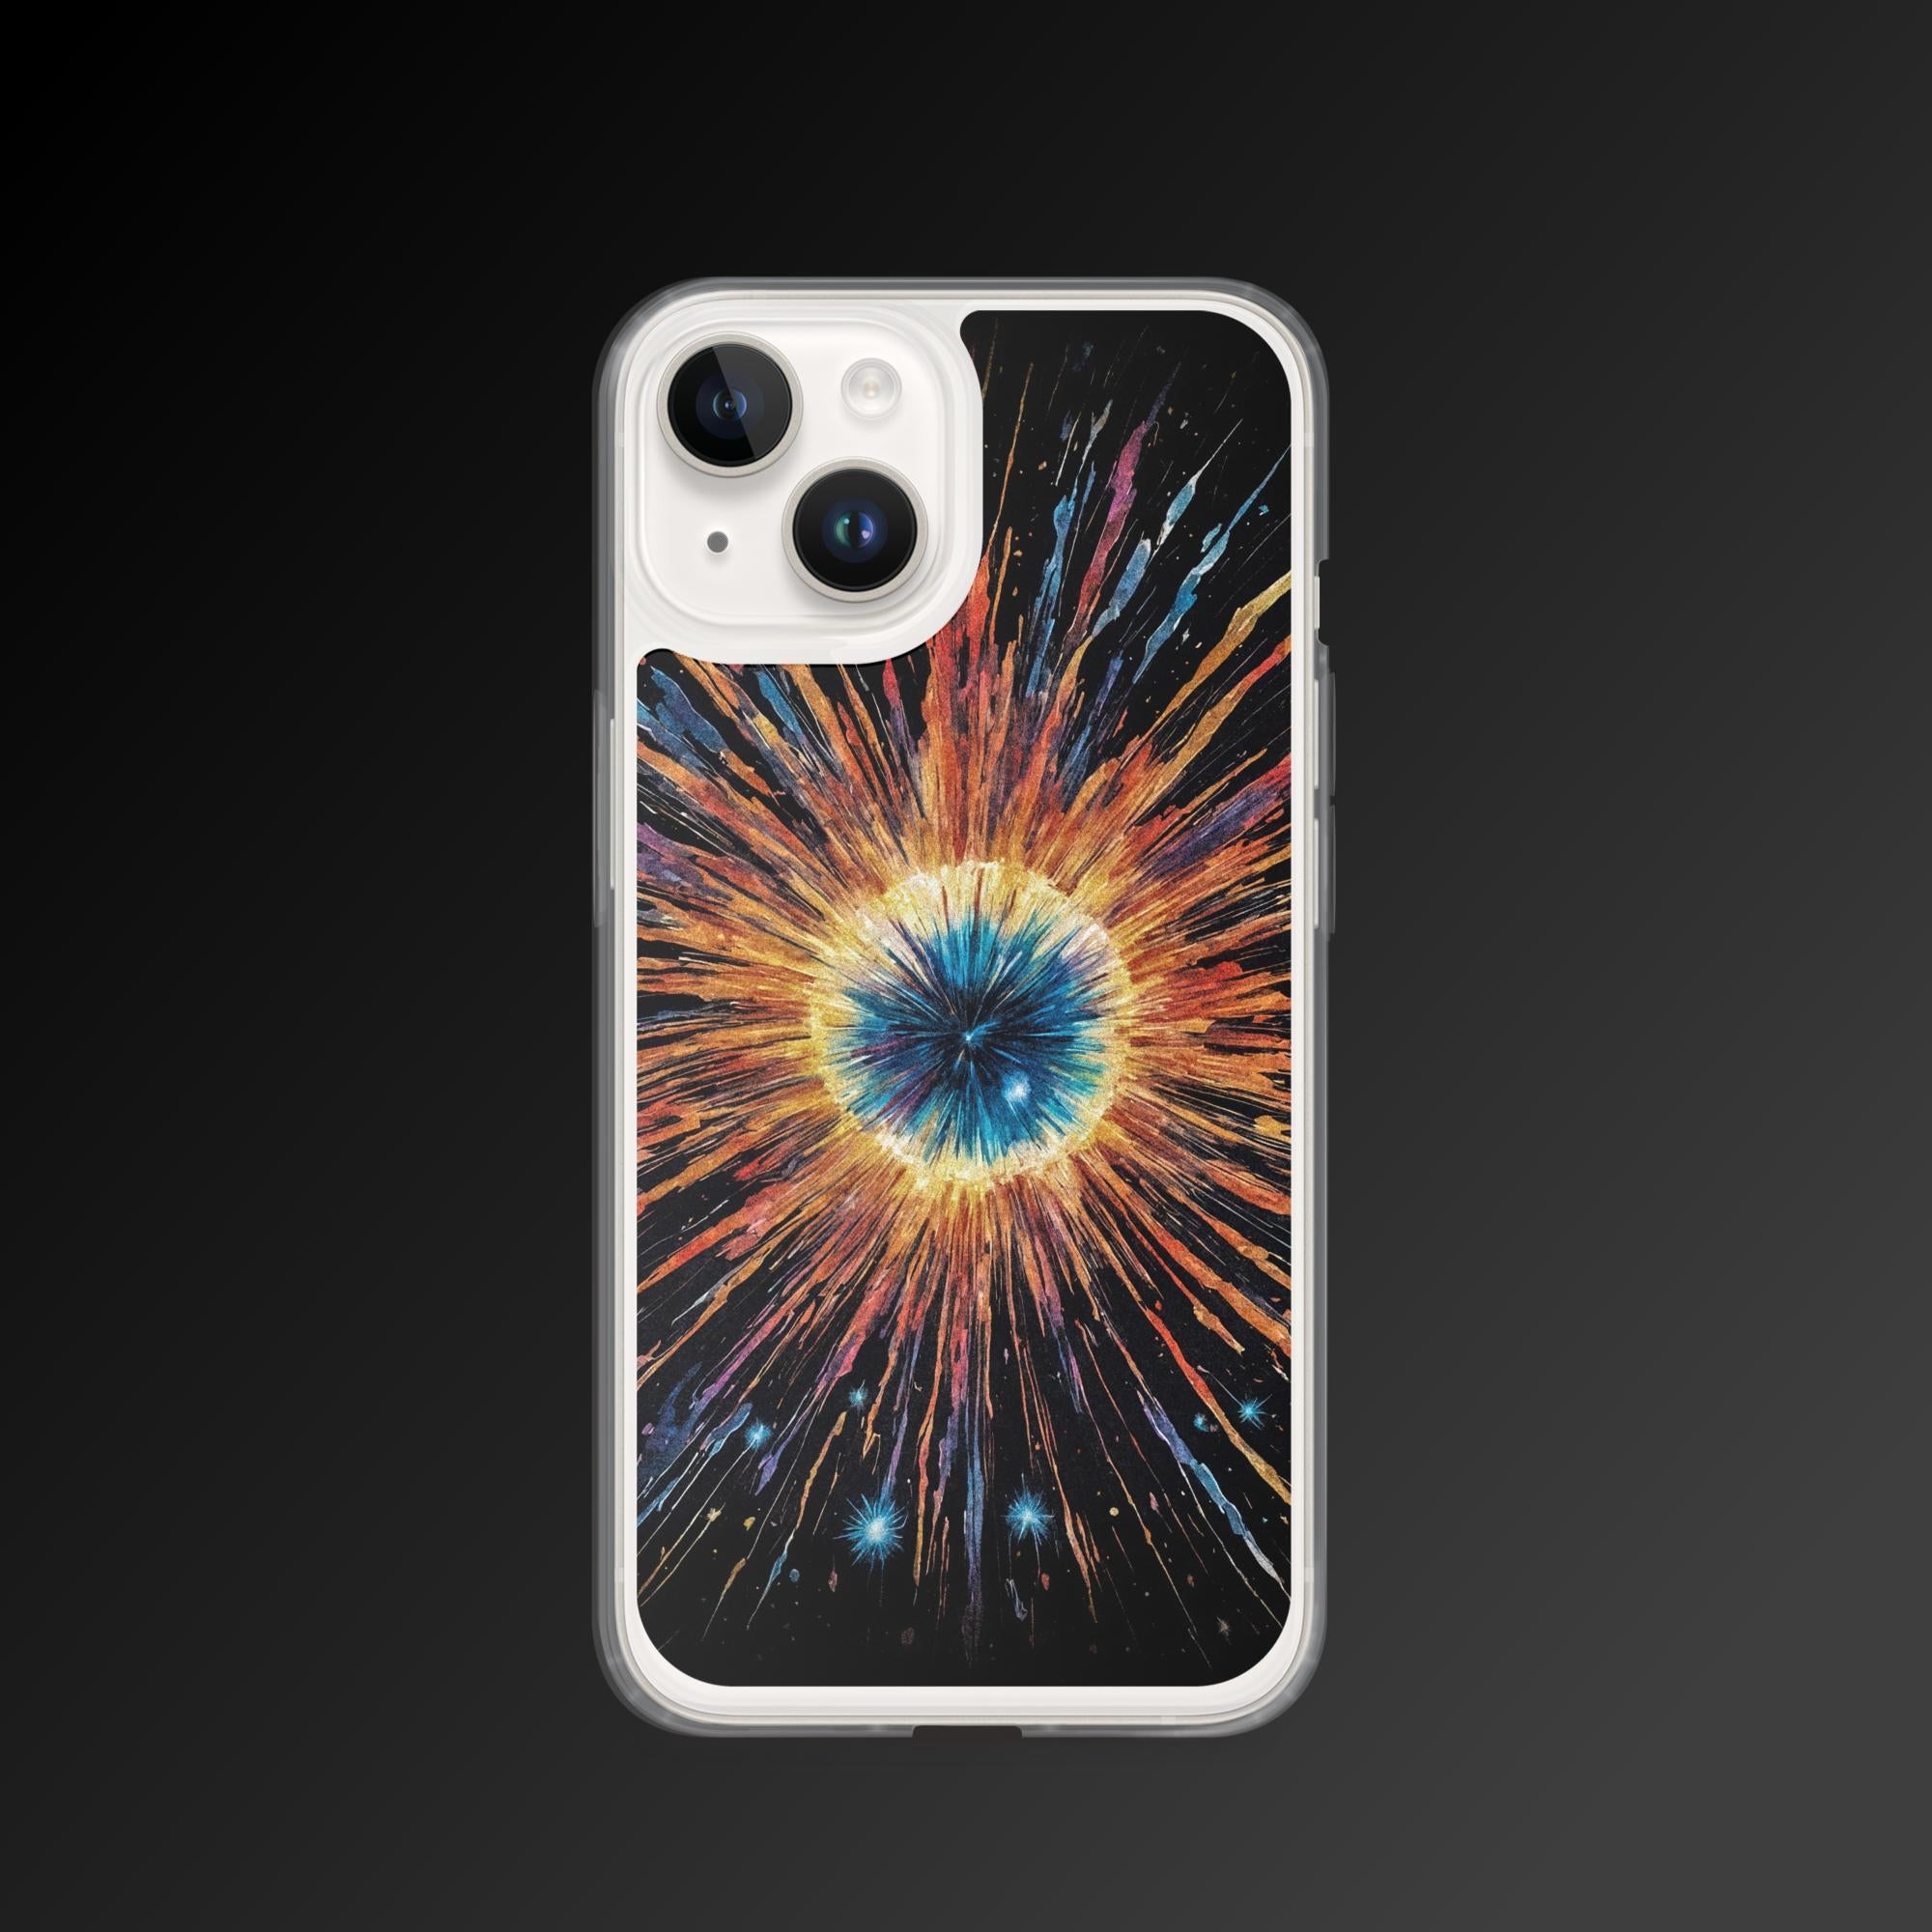 "Chroma blast" clear iphone case - Clear iphone case - Ever colorful